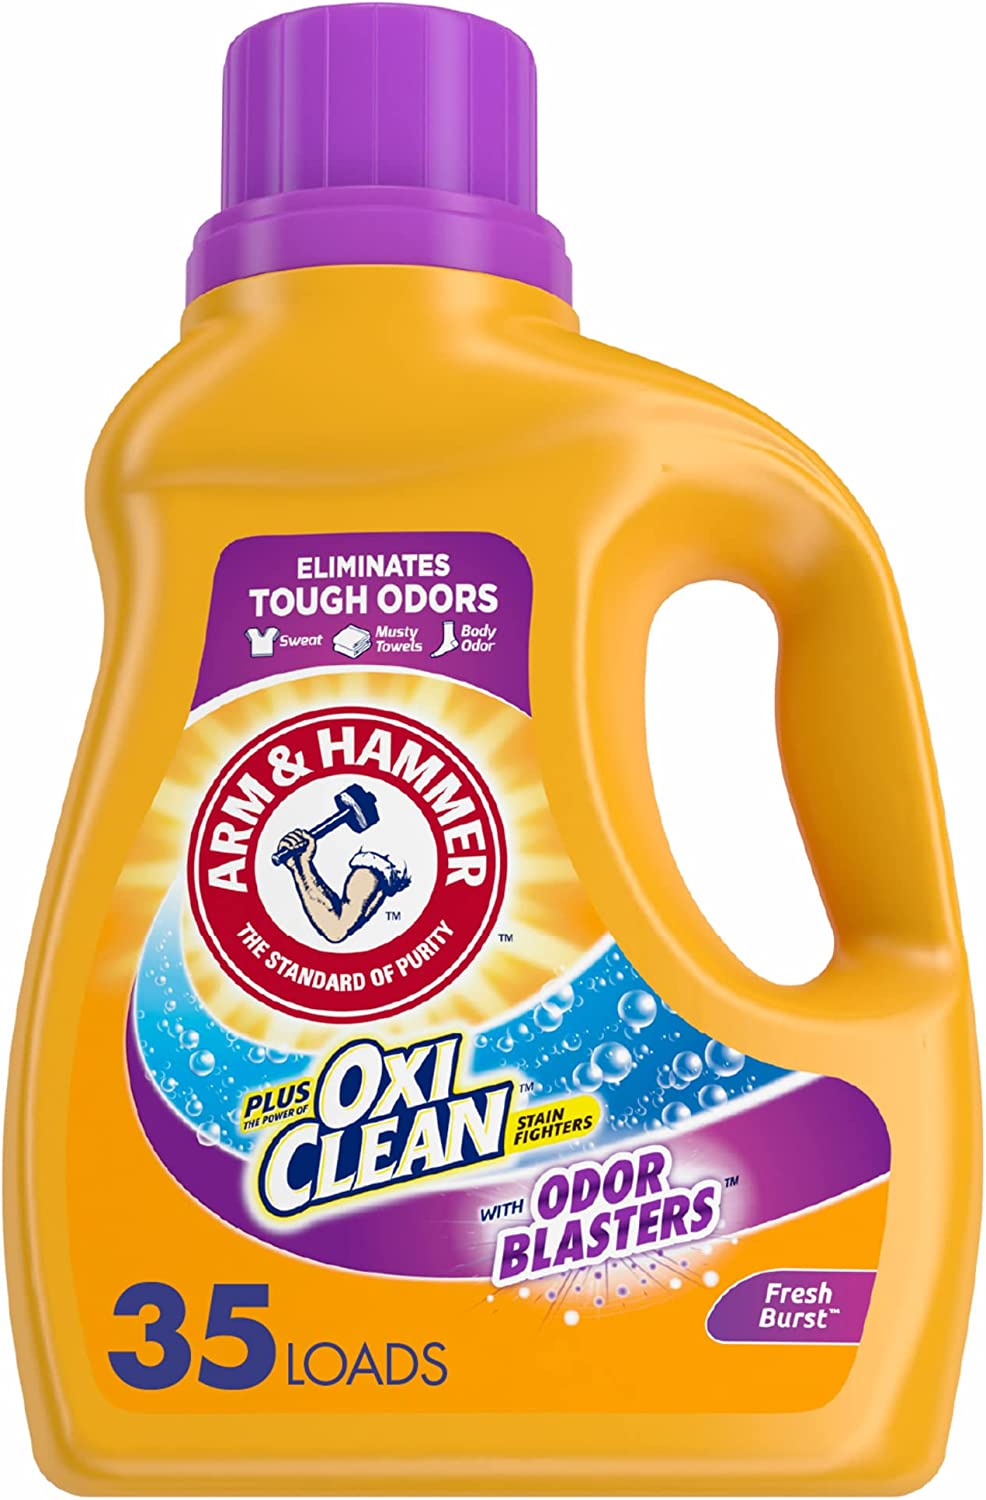 Arm _ Hammer Plus OxiClean Odor Blasters Laundry Detergent-1